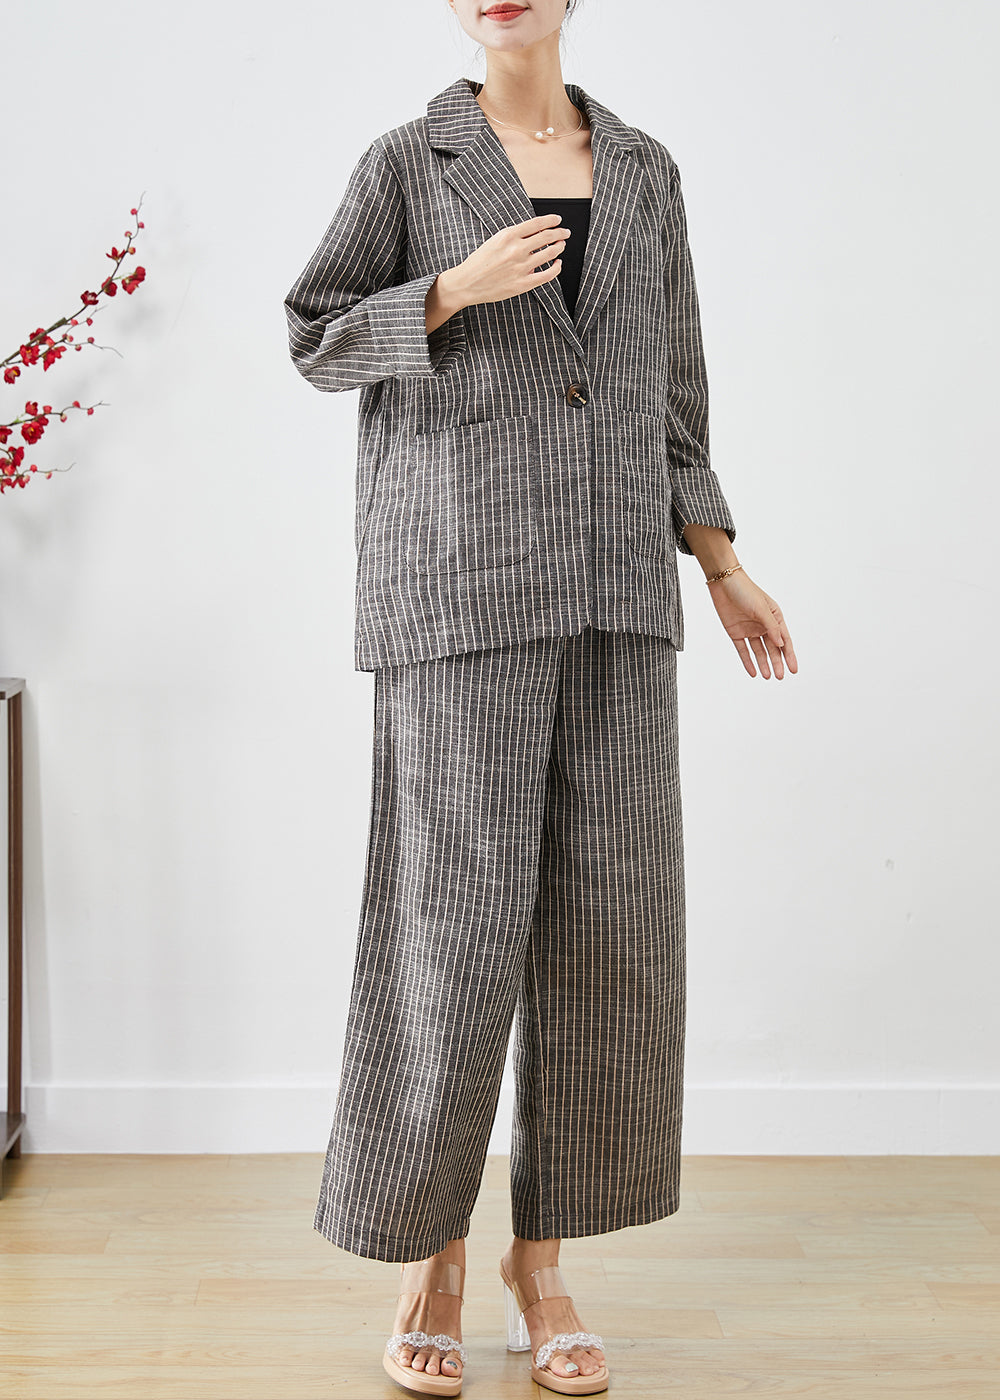 Vintage Grey Striped Linen Two Piece Set Outfits Fall